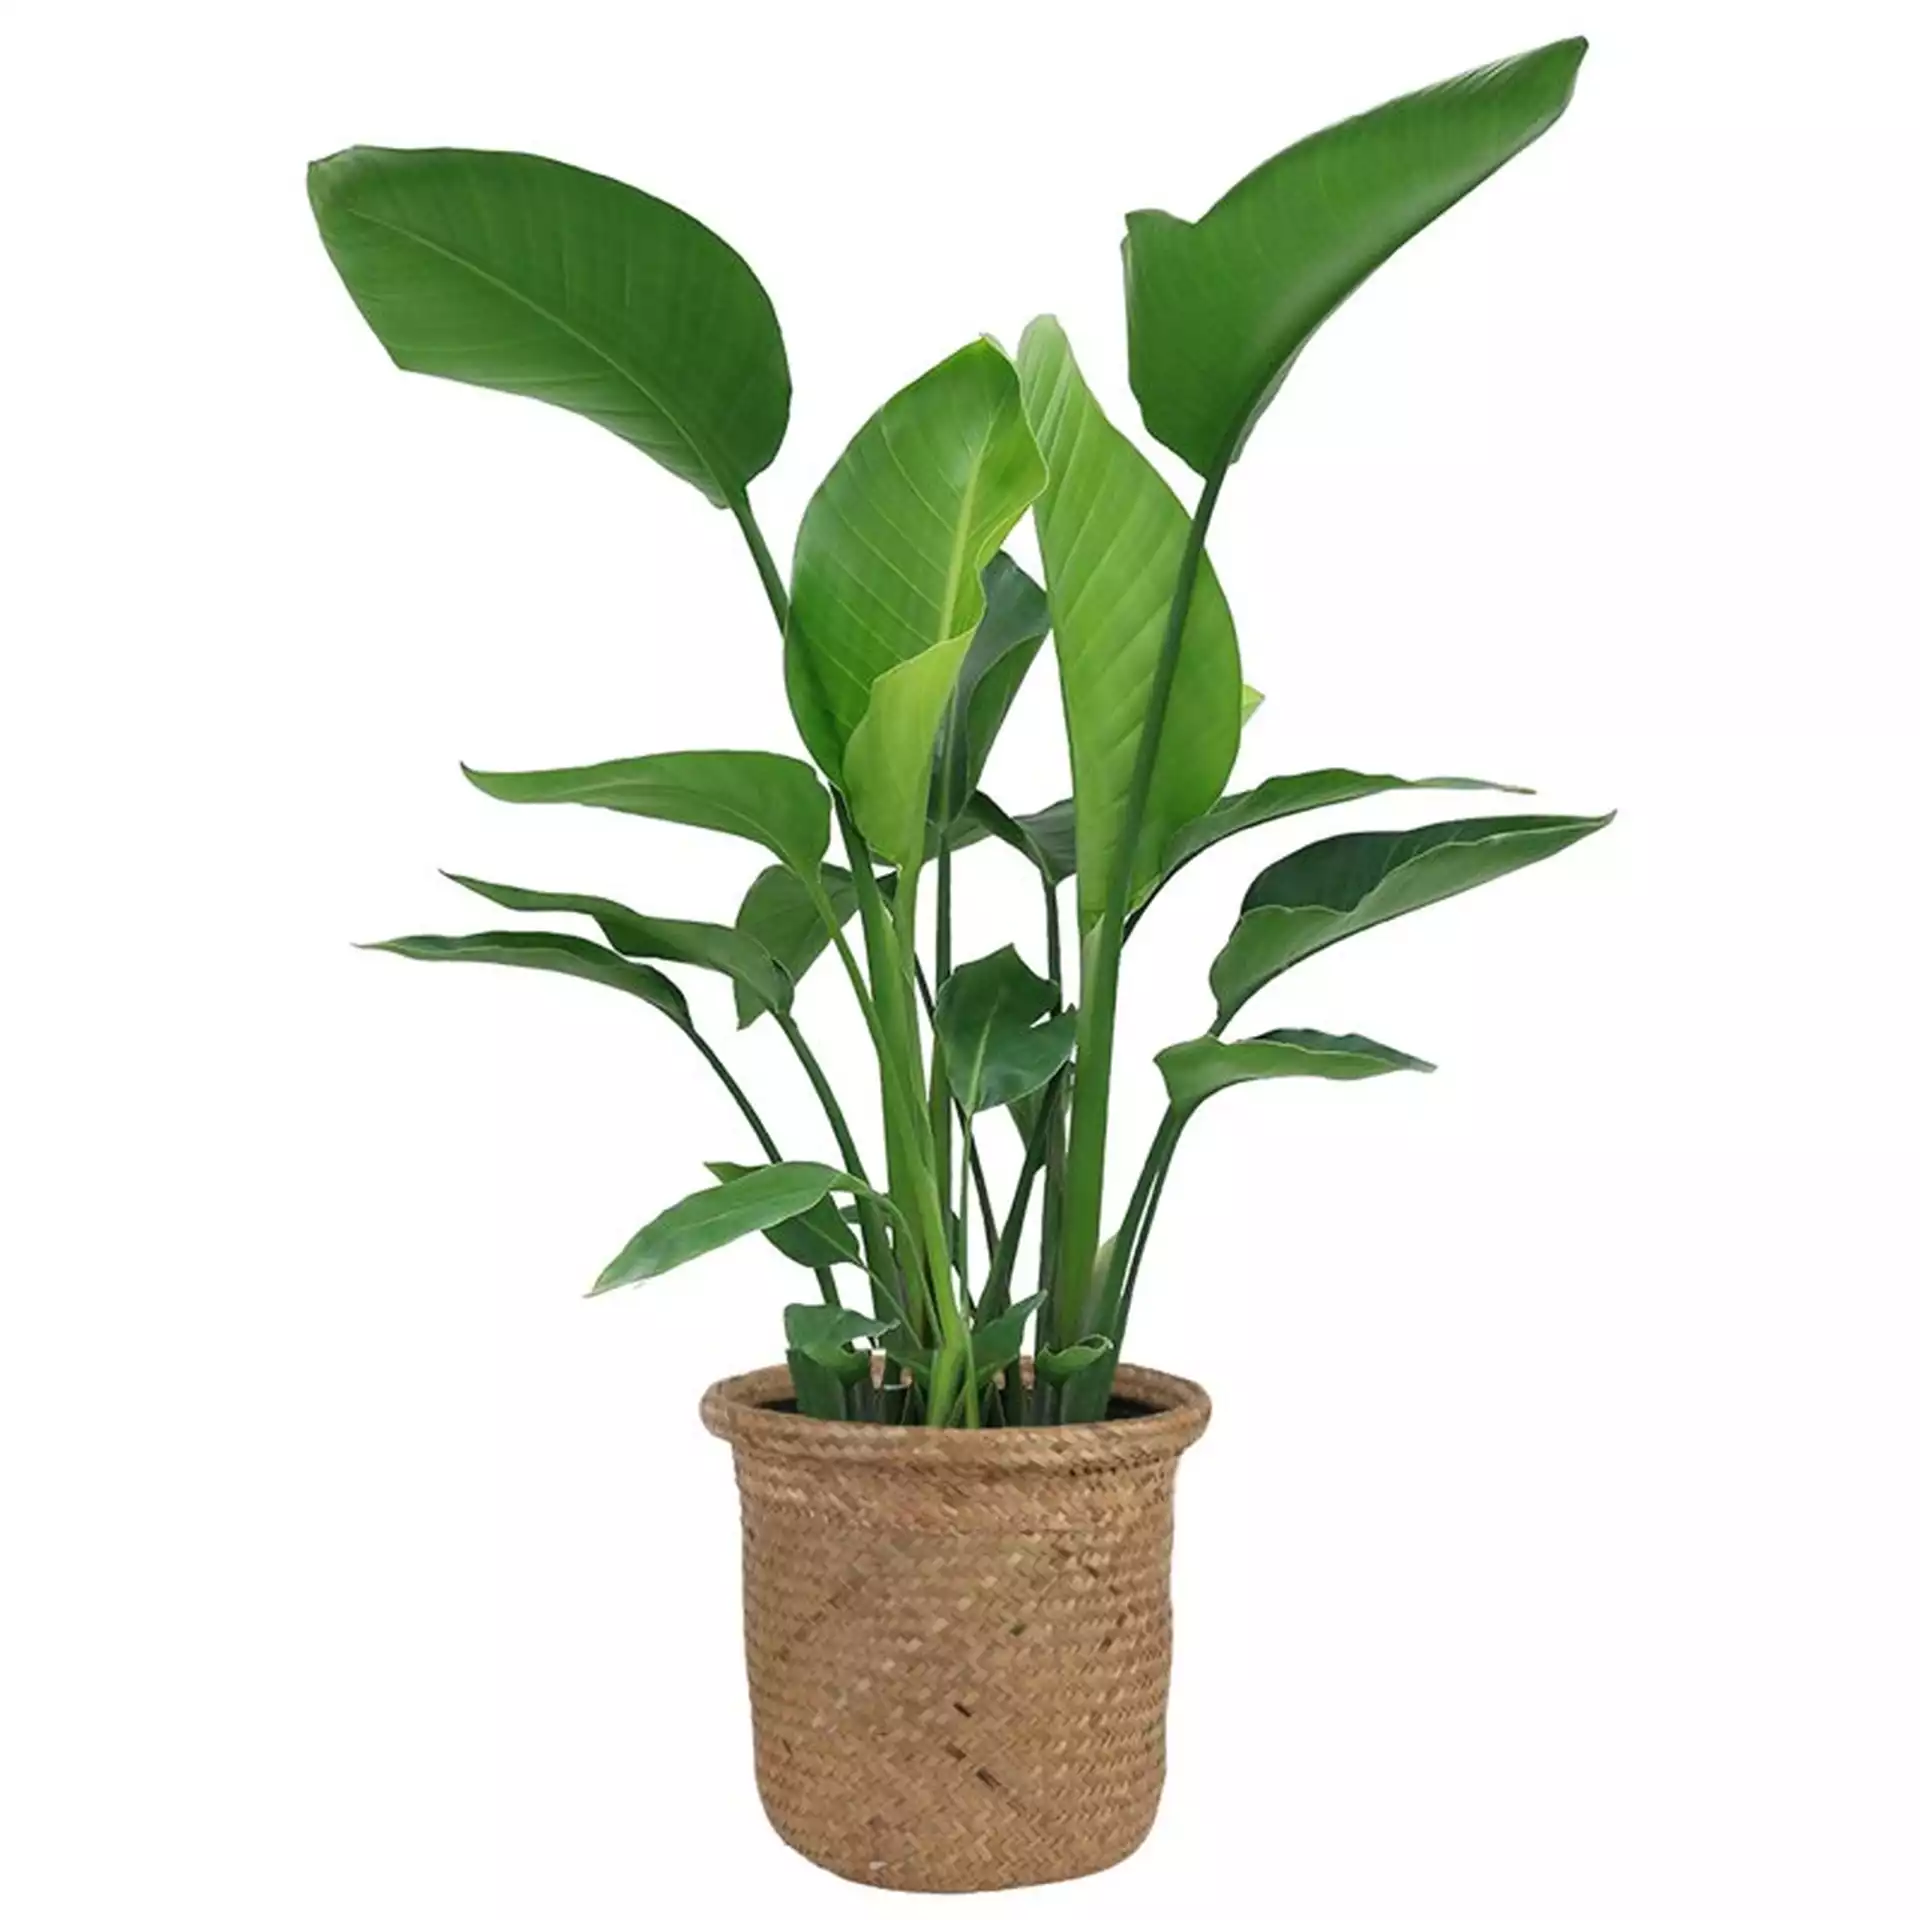 Costa Farms Live White Bird of Paradise Plant in Basket, 24"